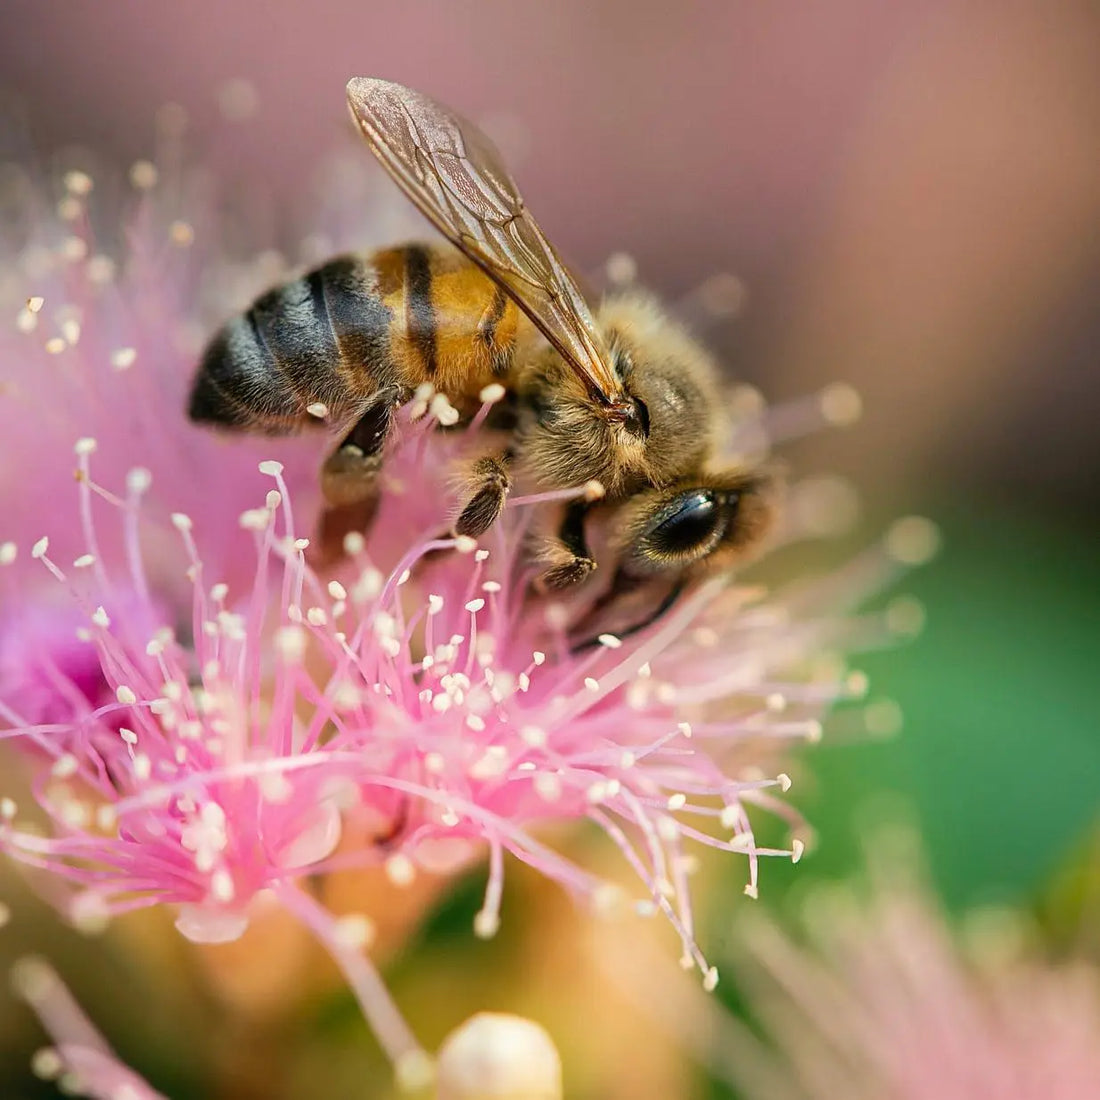 Bees Have a Serious Sense of Smell